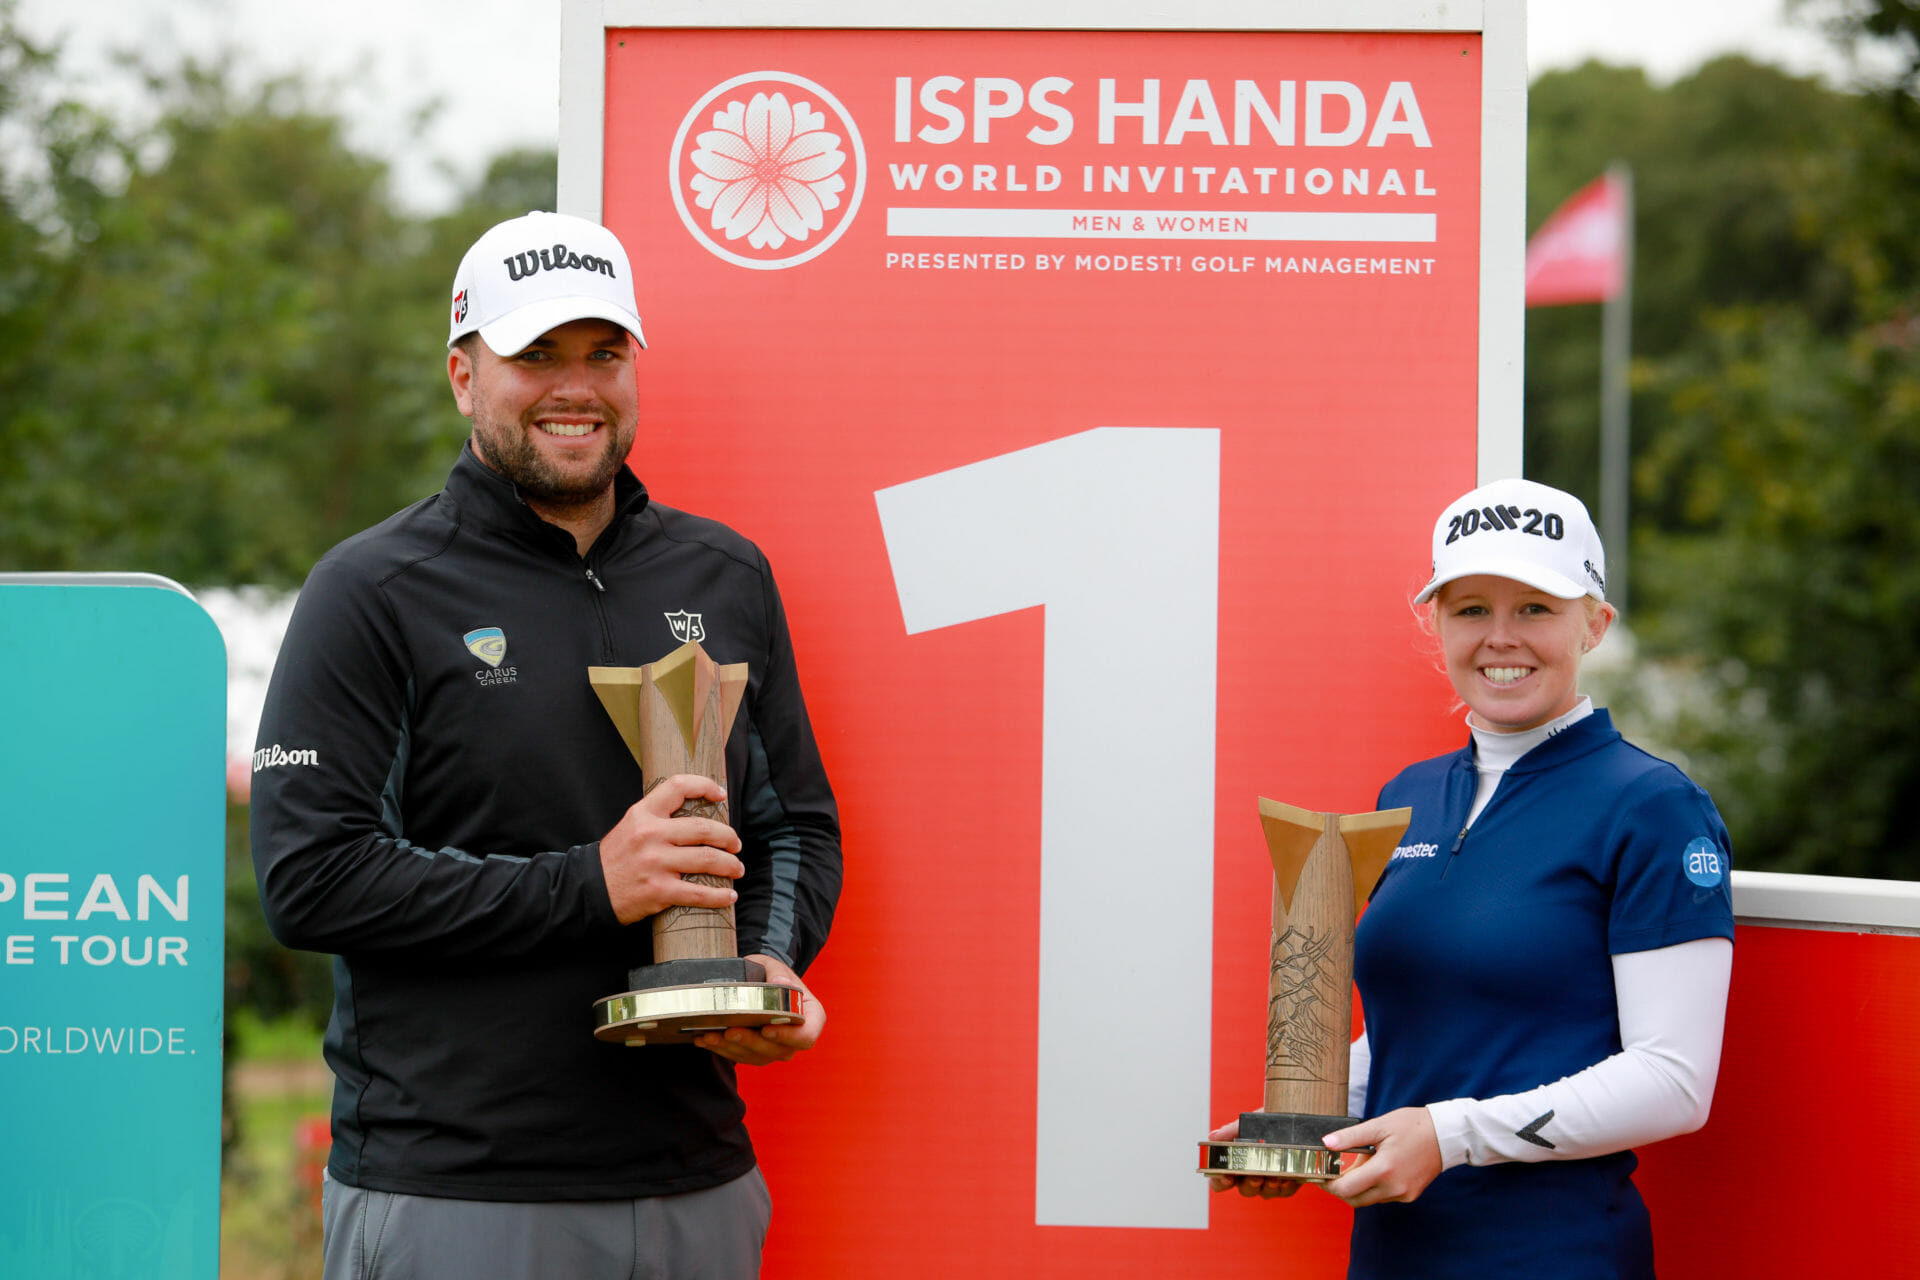 What’s next for the ISPS Handa World Invitational?